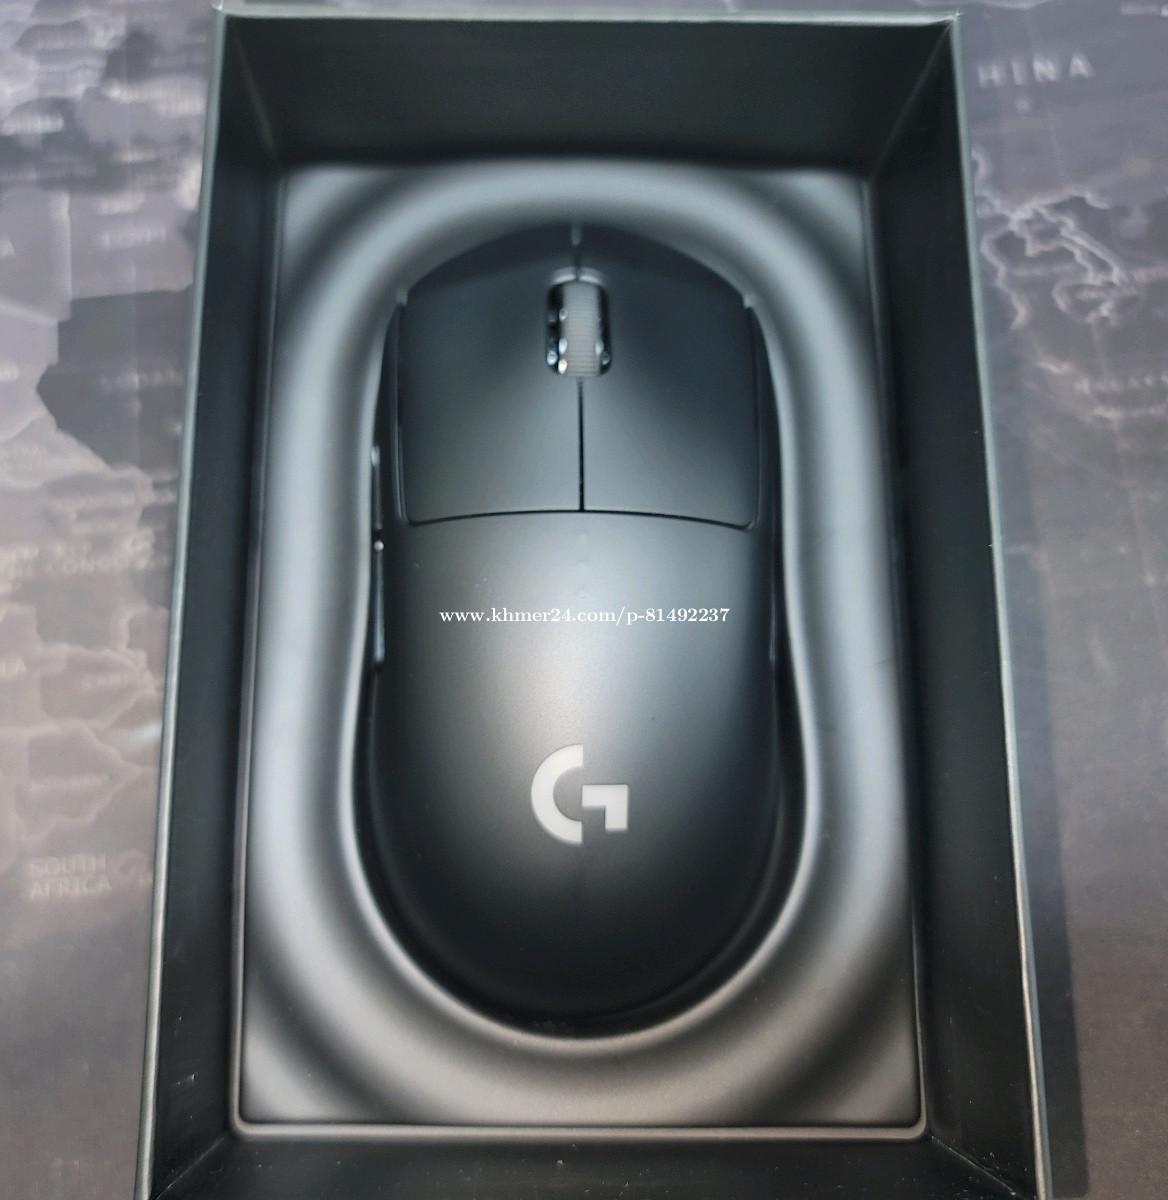 Logitech G Pro Wireless Gaming Mouse with Esports Grade